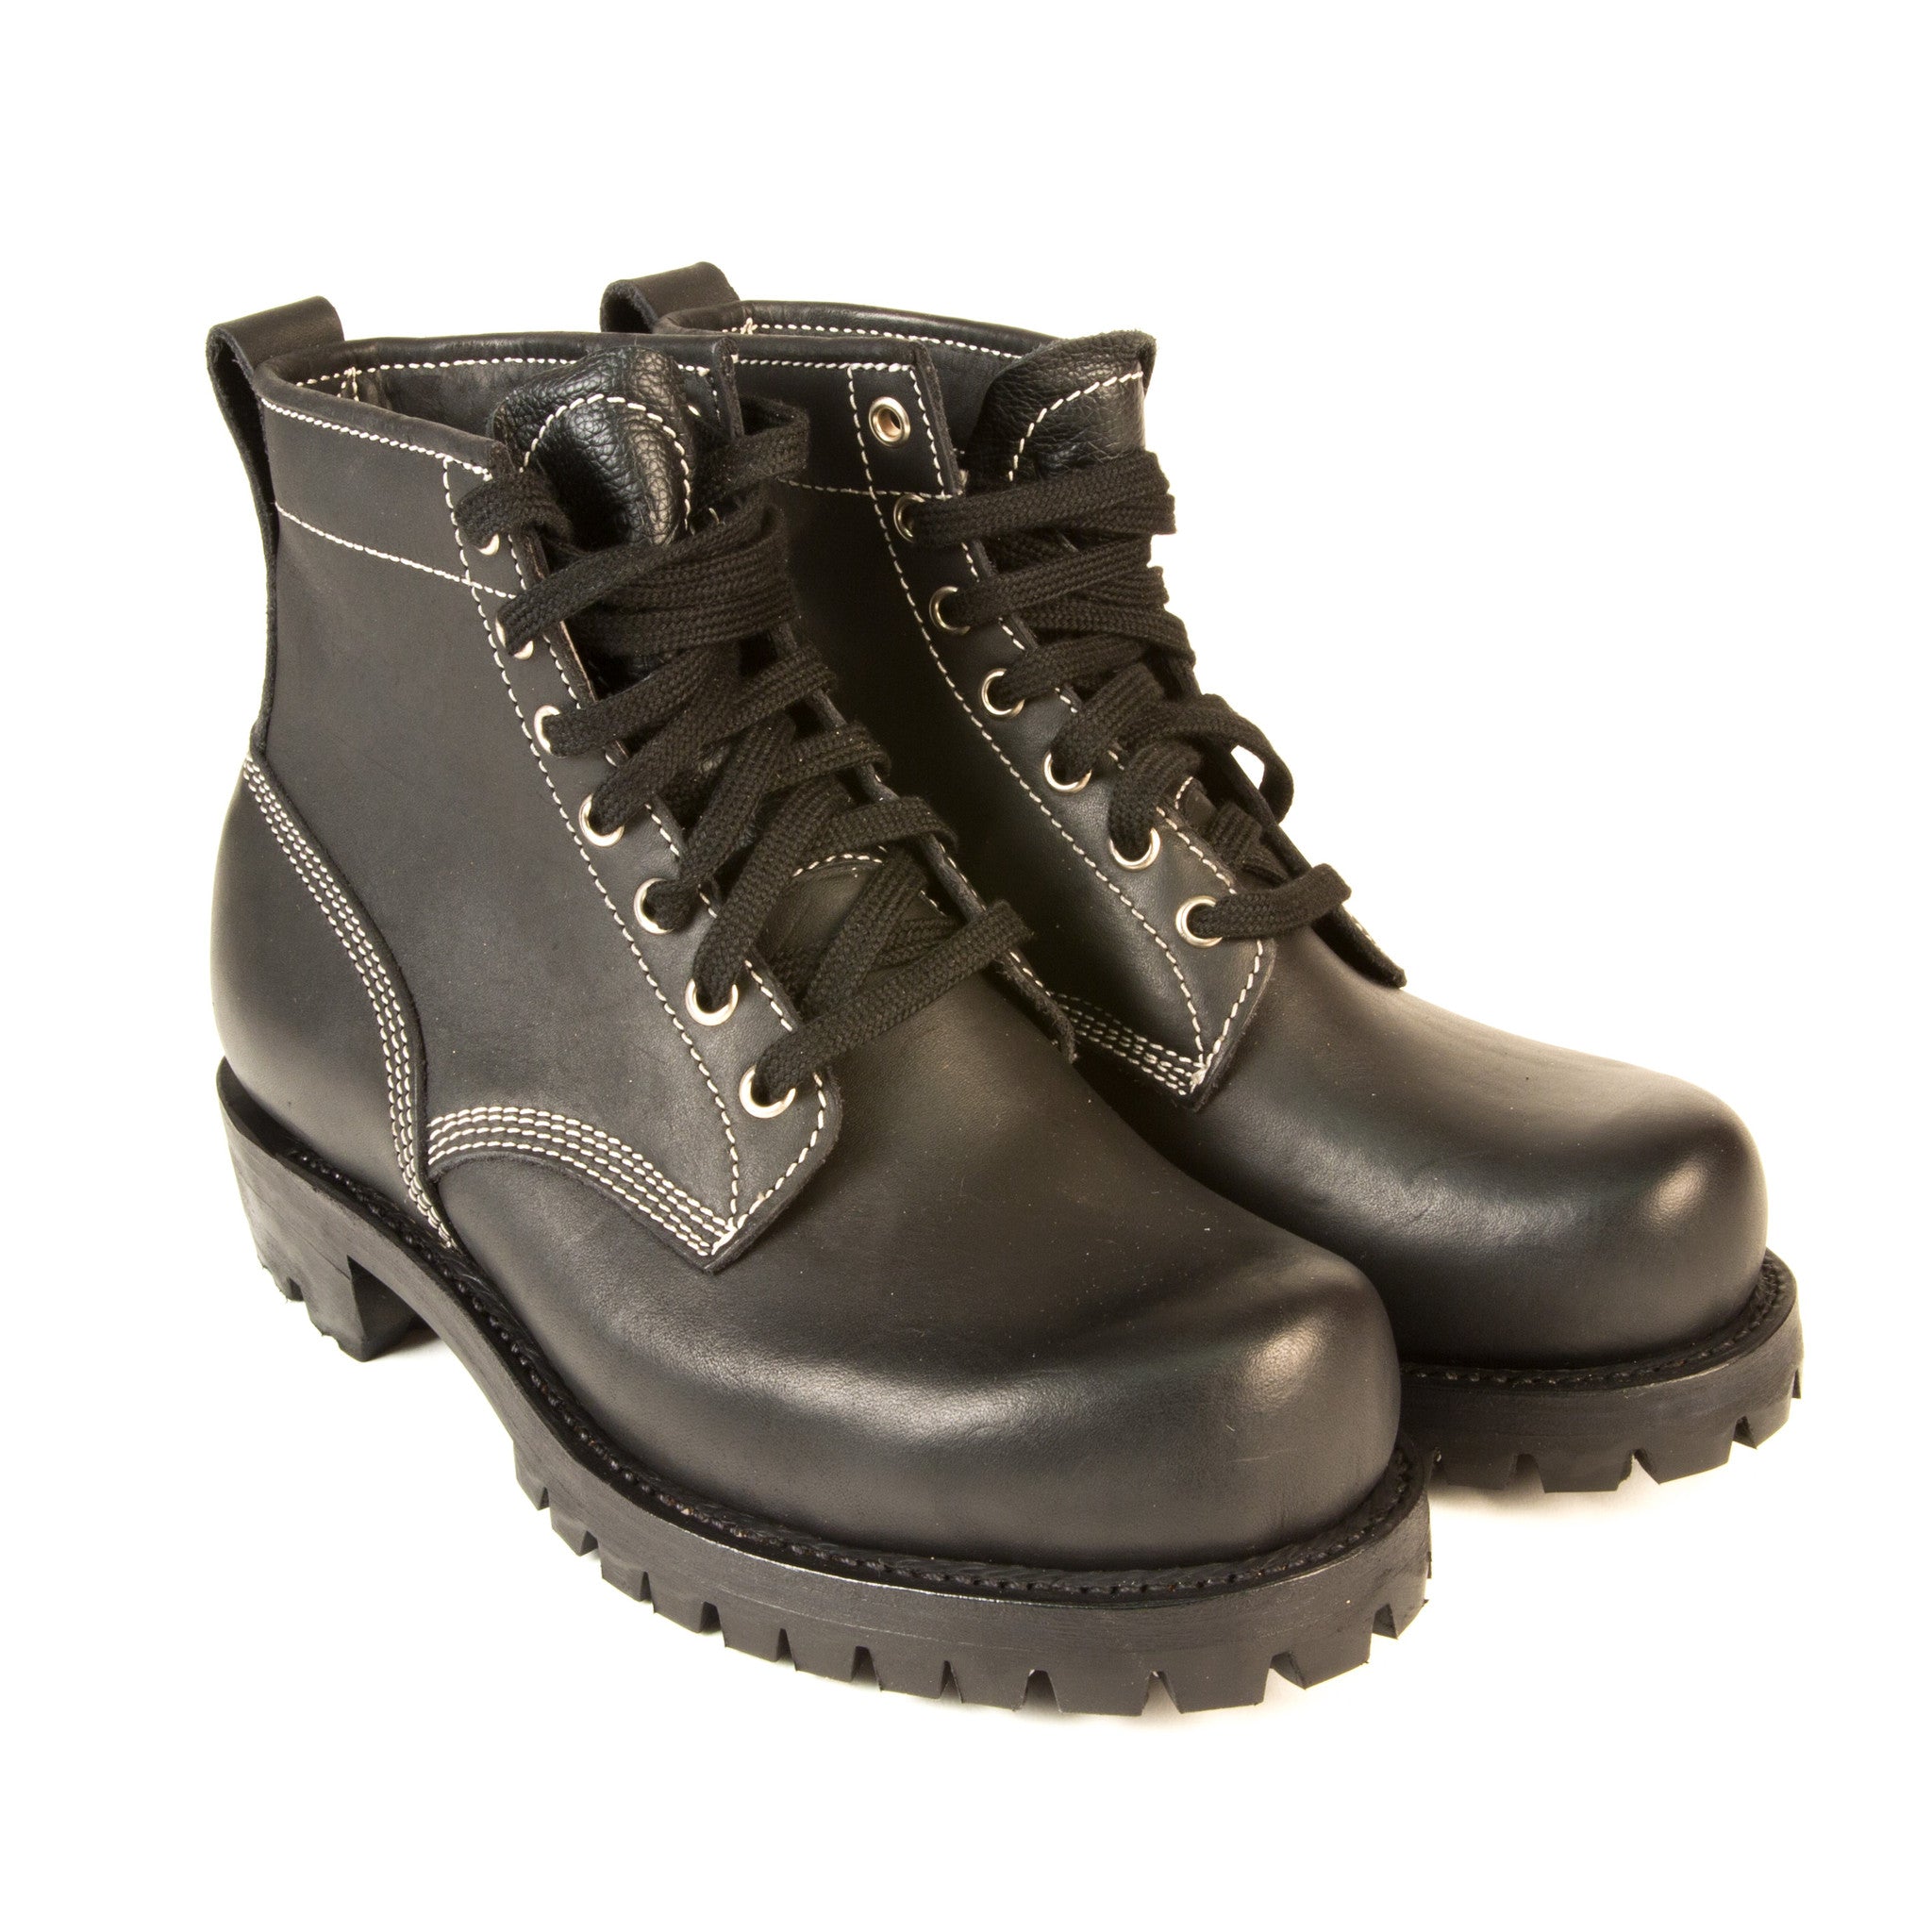 Toughie - Made to Order - Boots